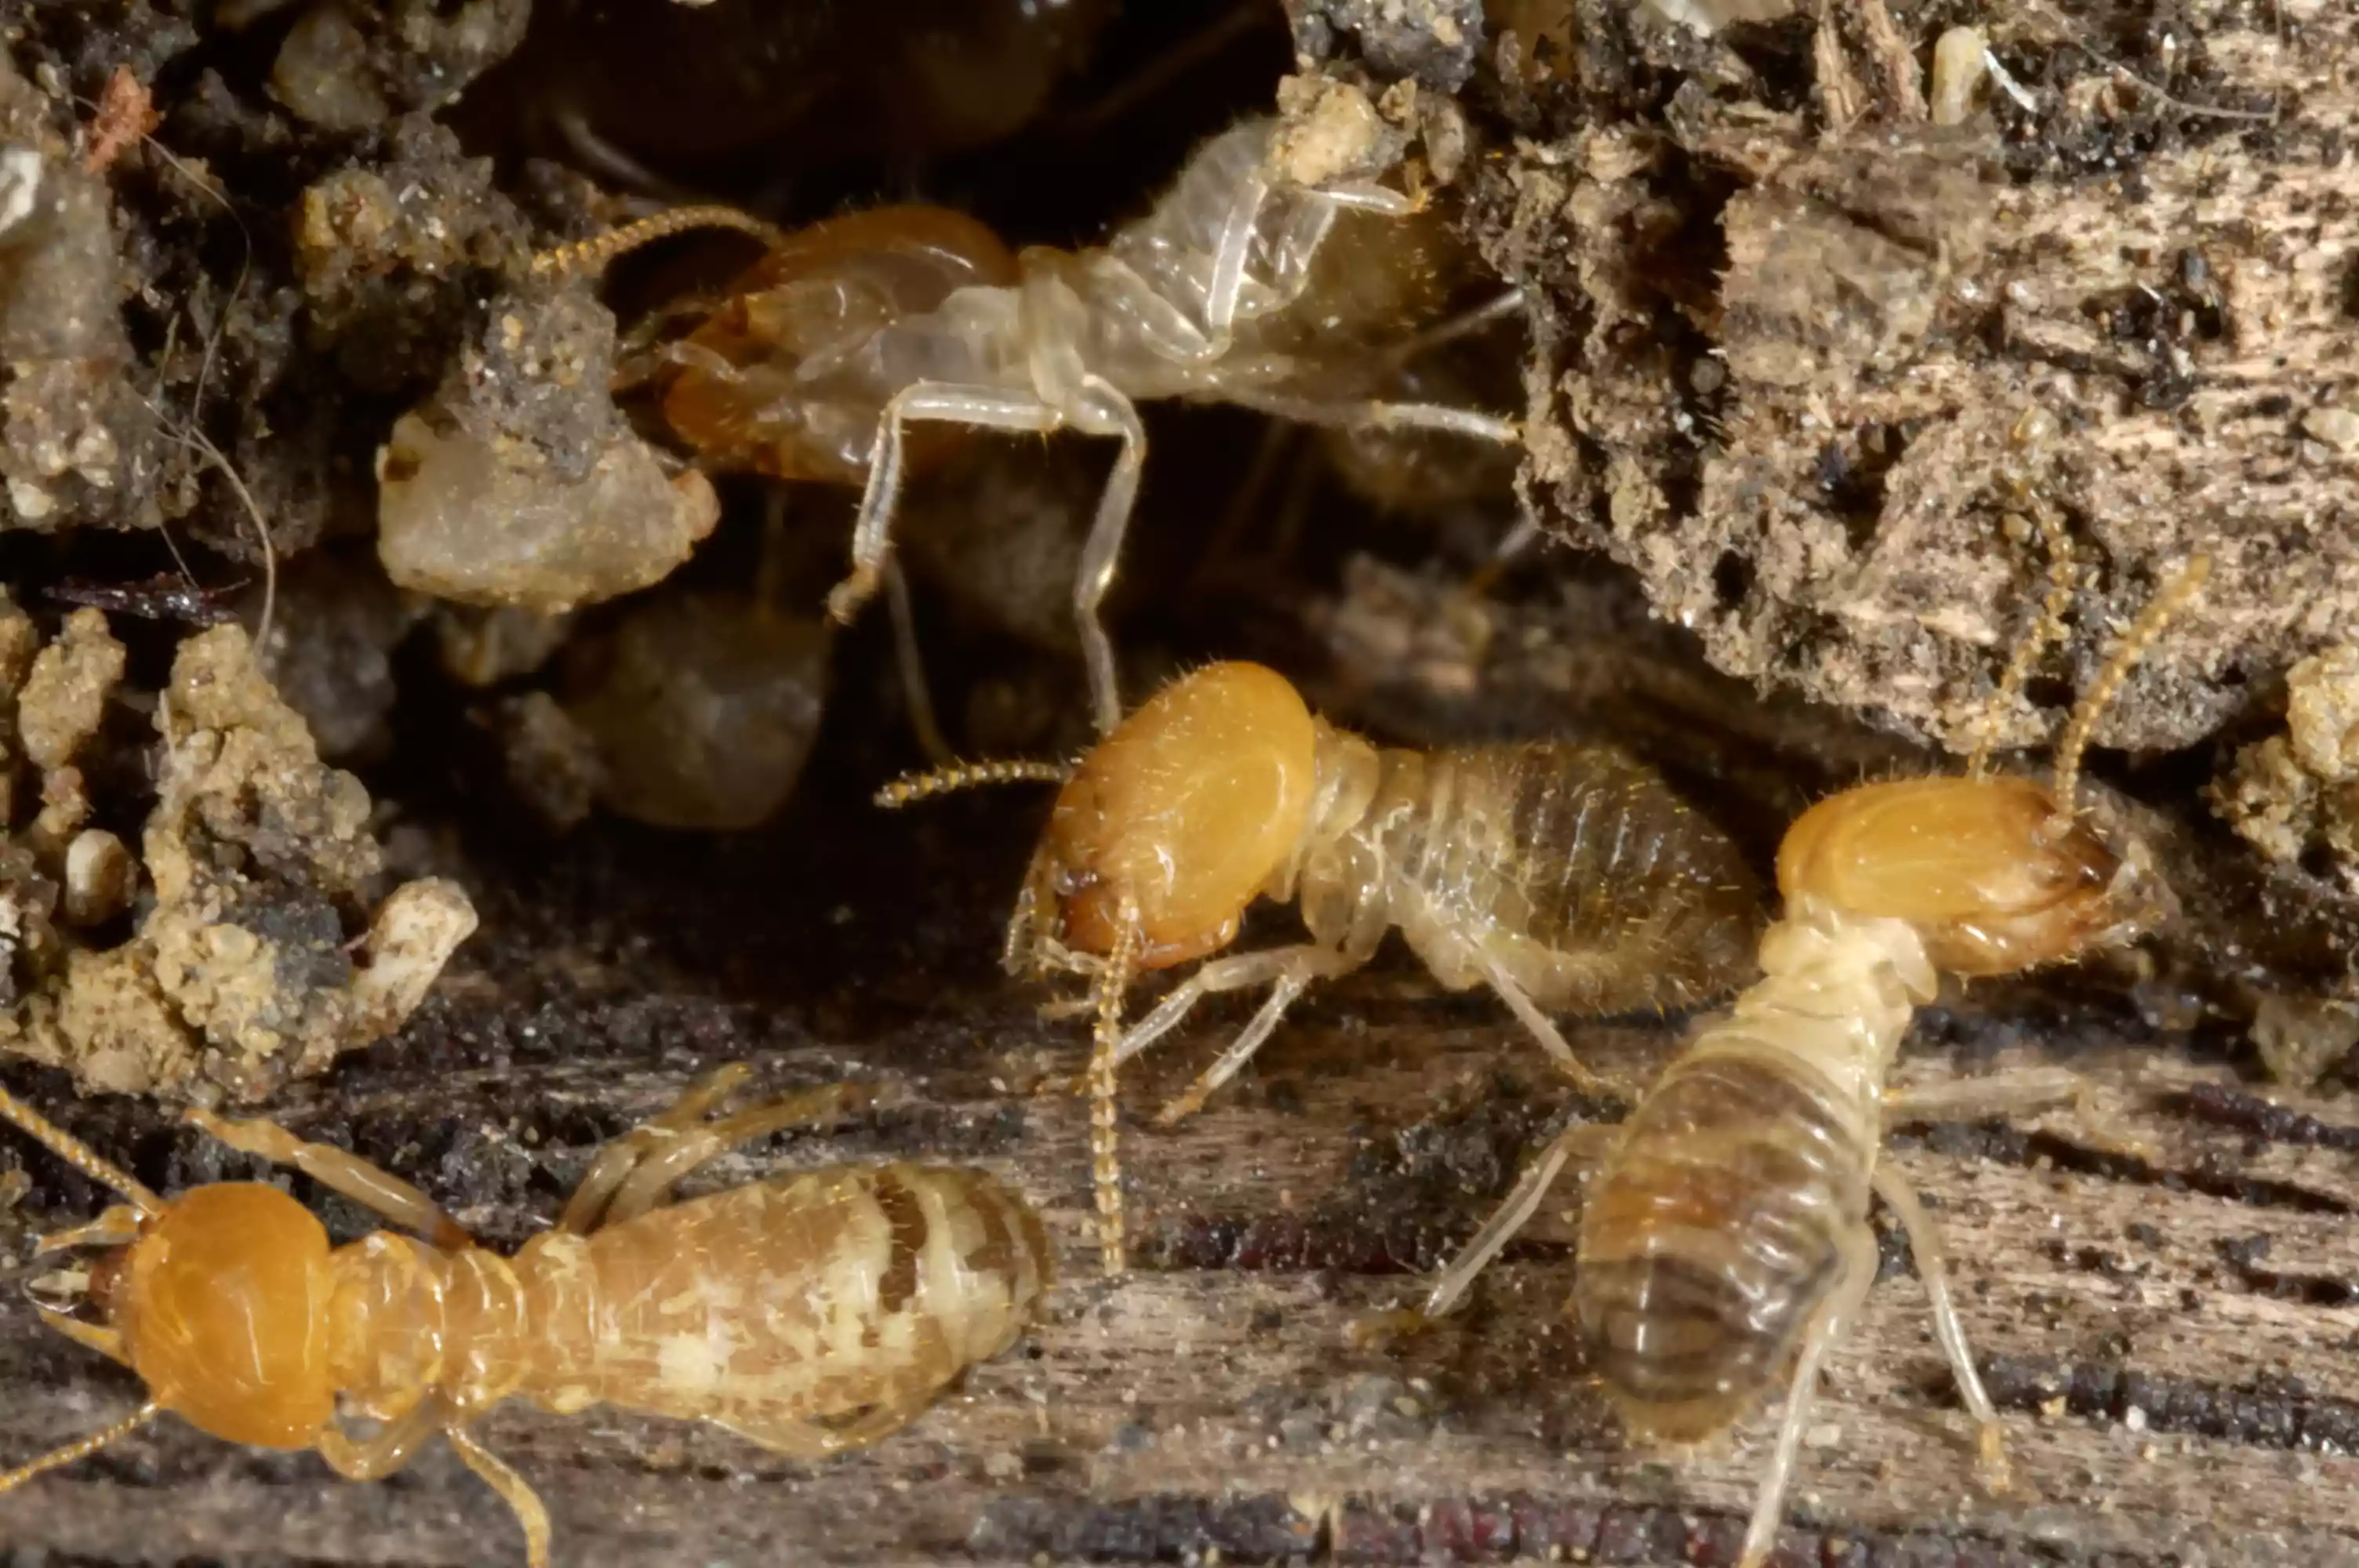 Termites at a small hole in the timber.